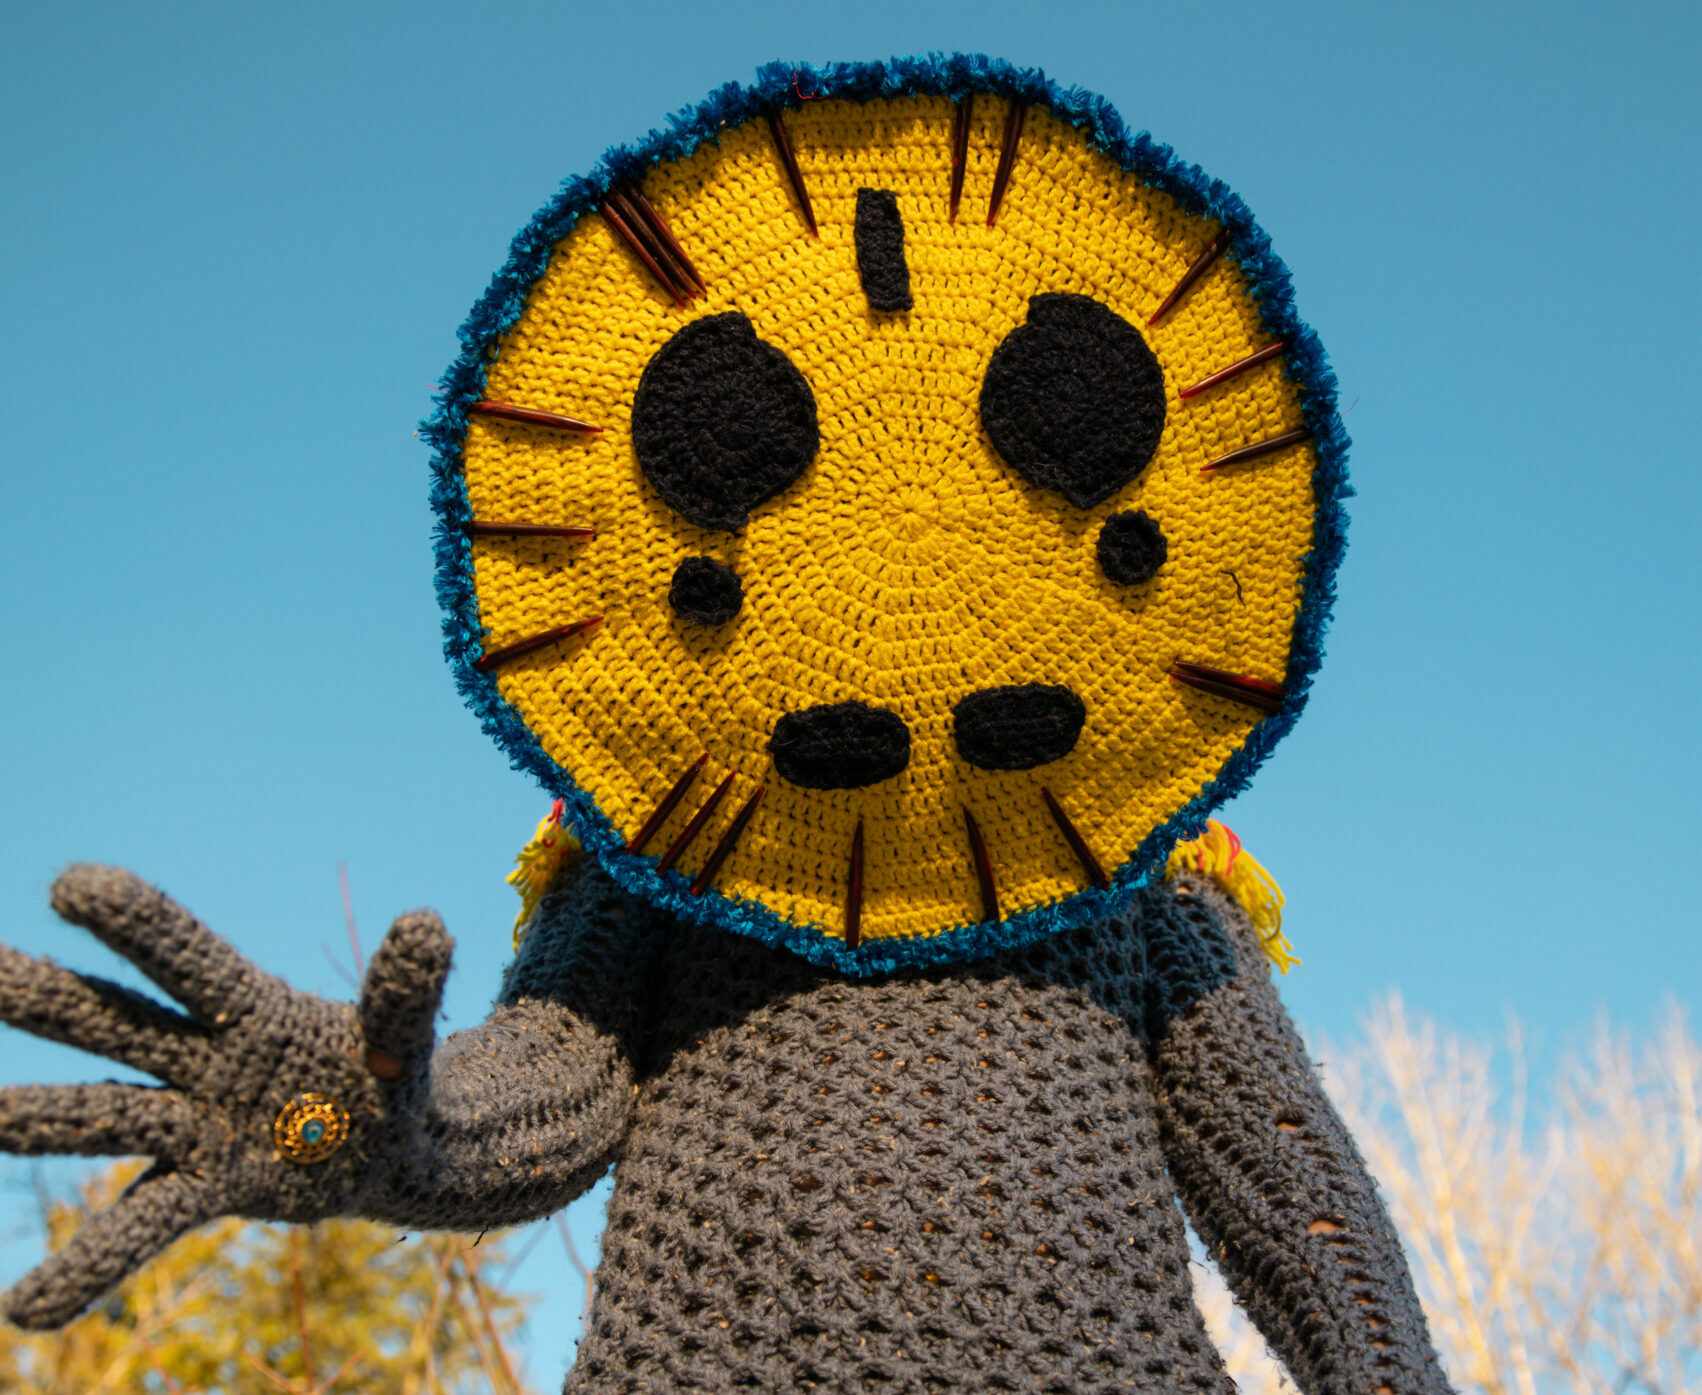 A figure wears a crocheted costume covering their entire body, habds and legs